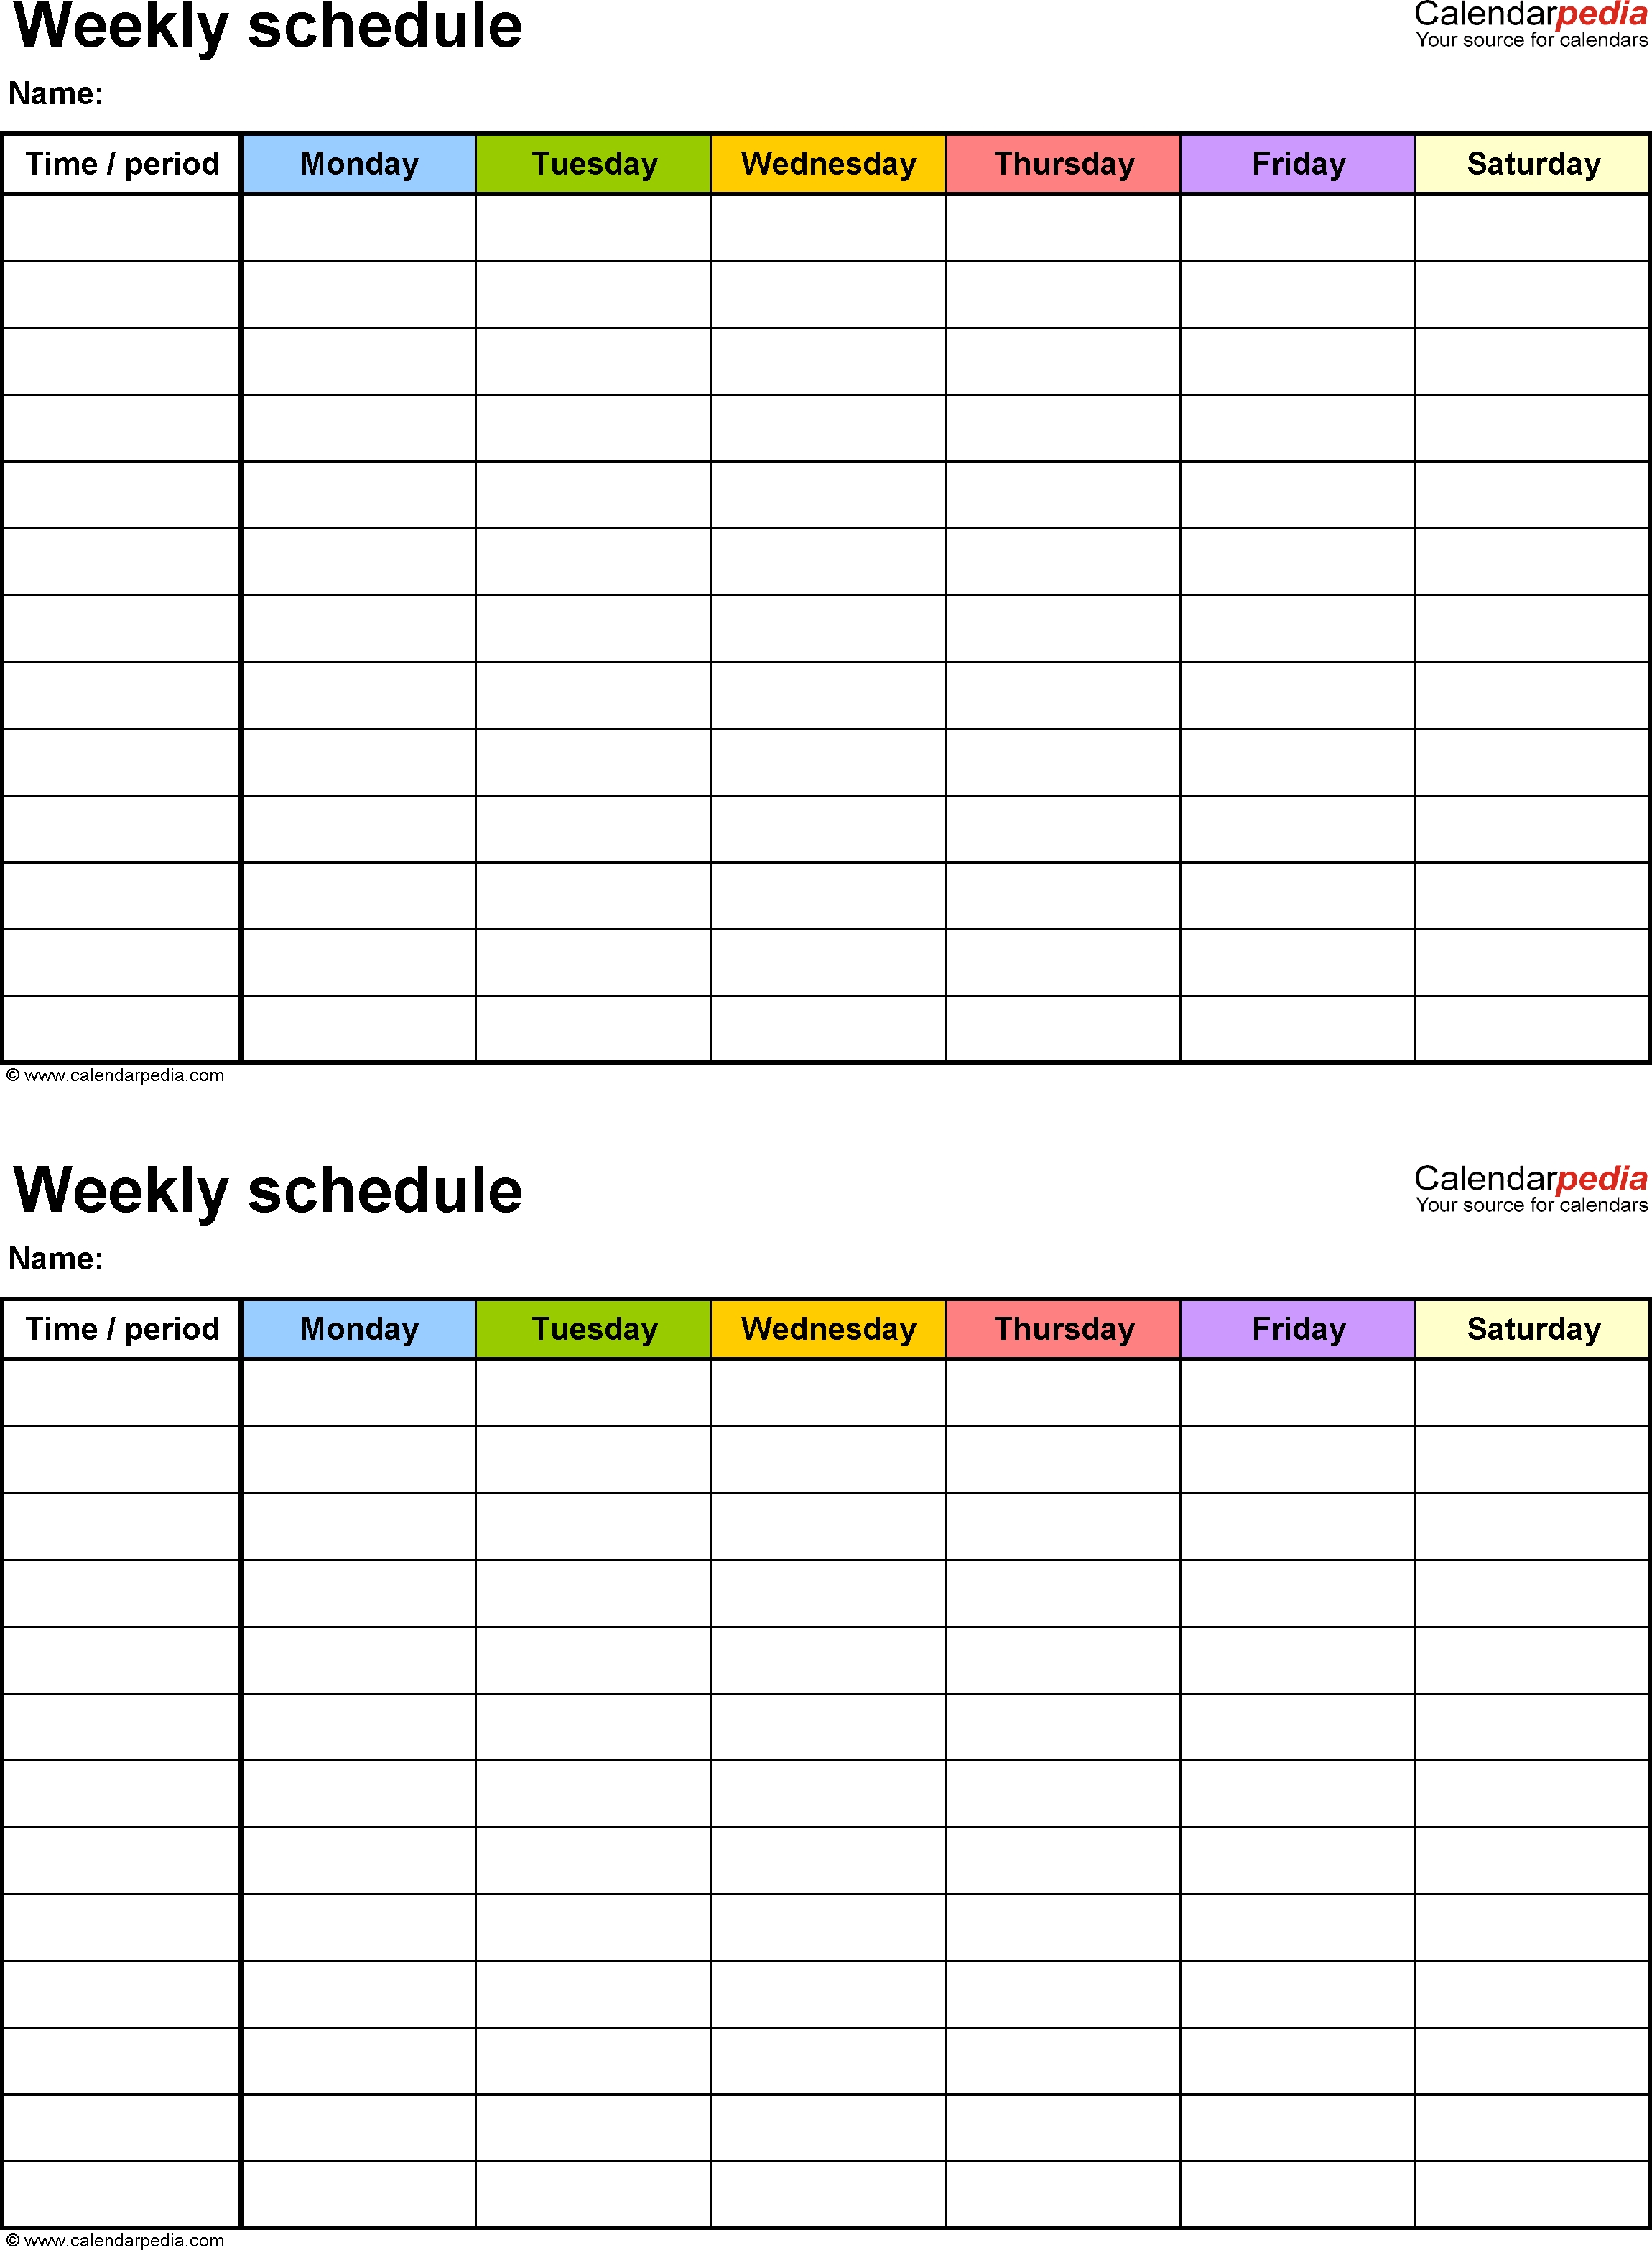 Free Weekly Schedule Templates For Word - 18 Templates inside 2 Week Calendar Template Word